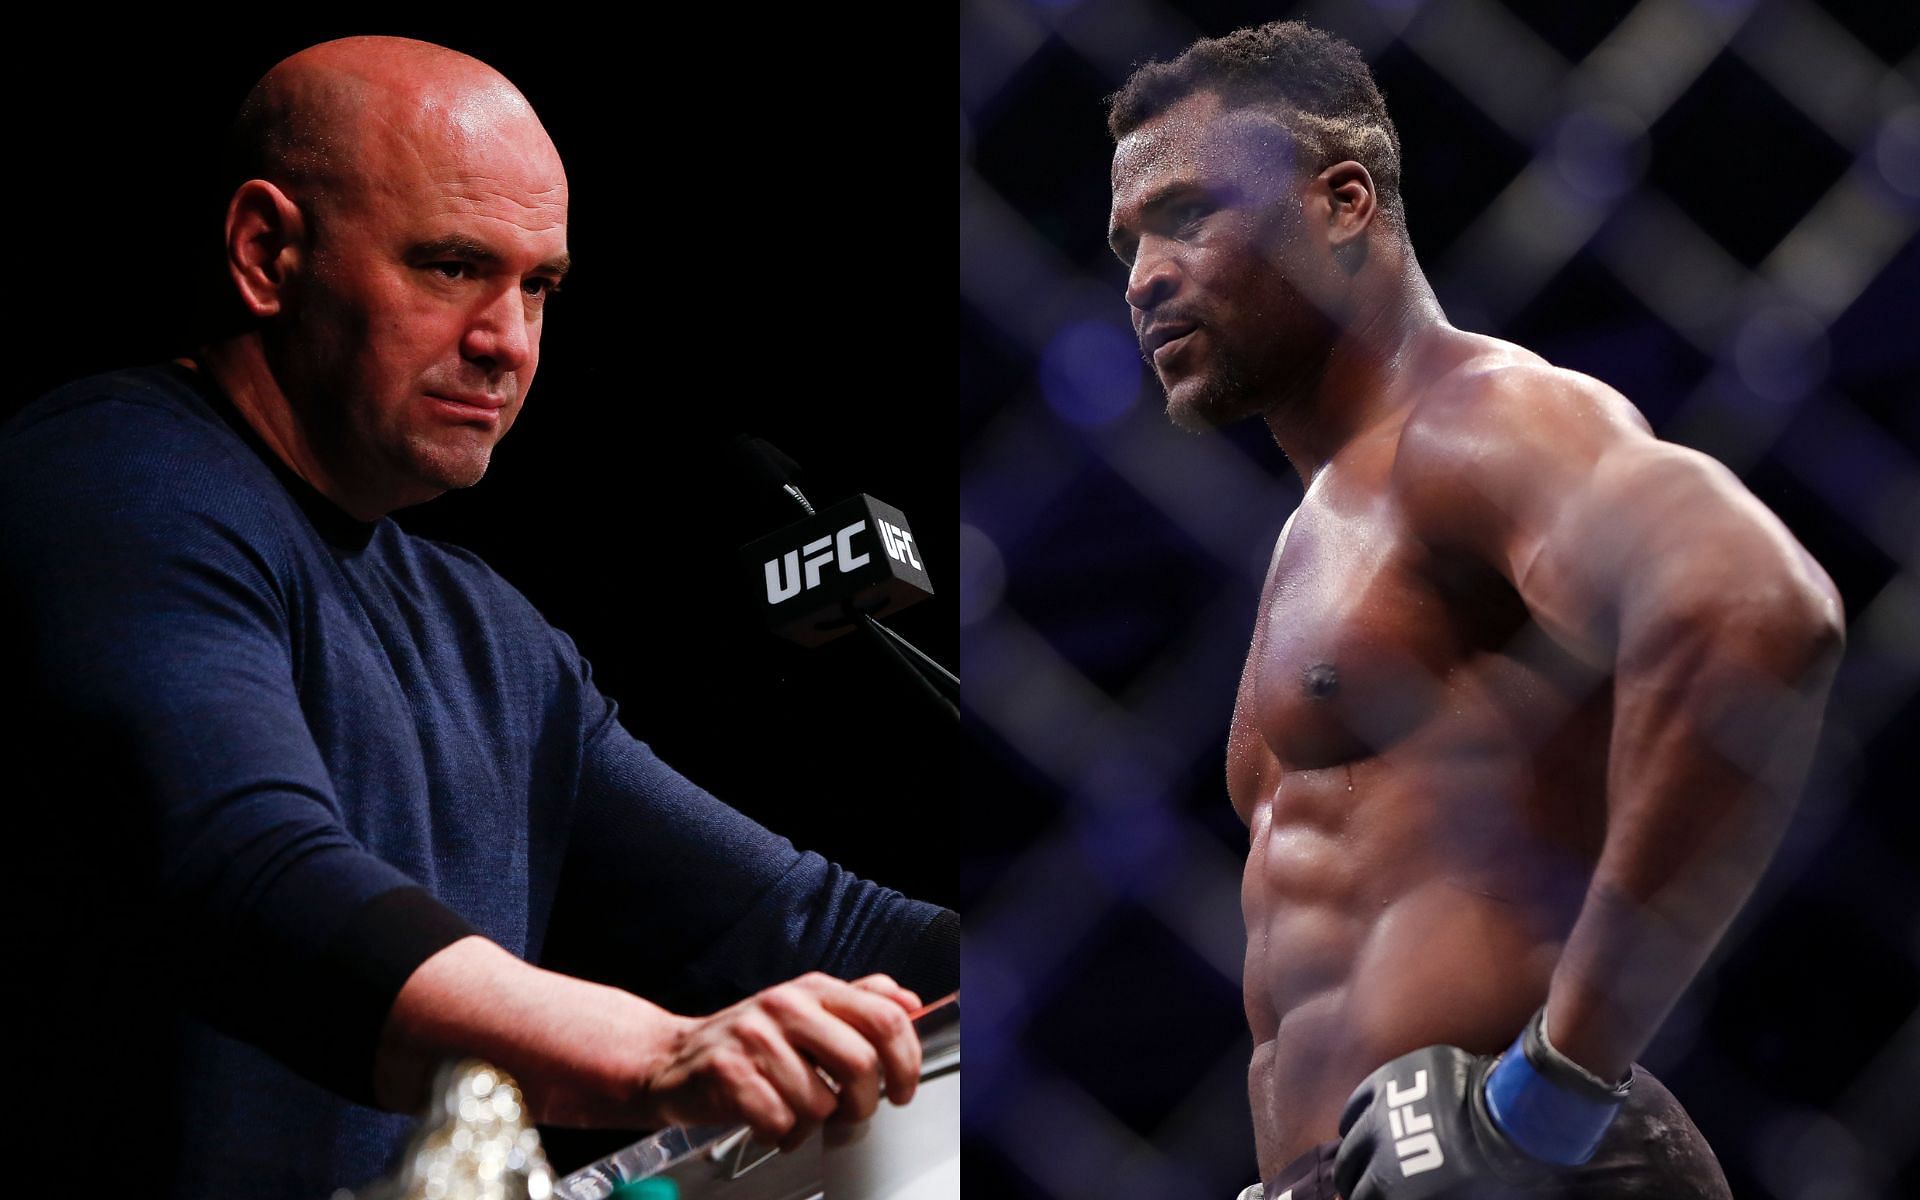 Dana White (left) and Francis Ngannou (right). [via Getty Images]